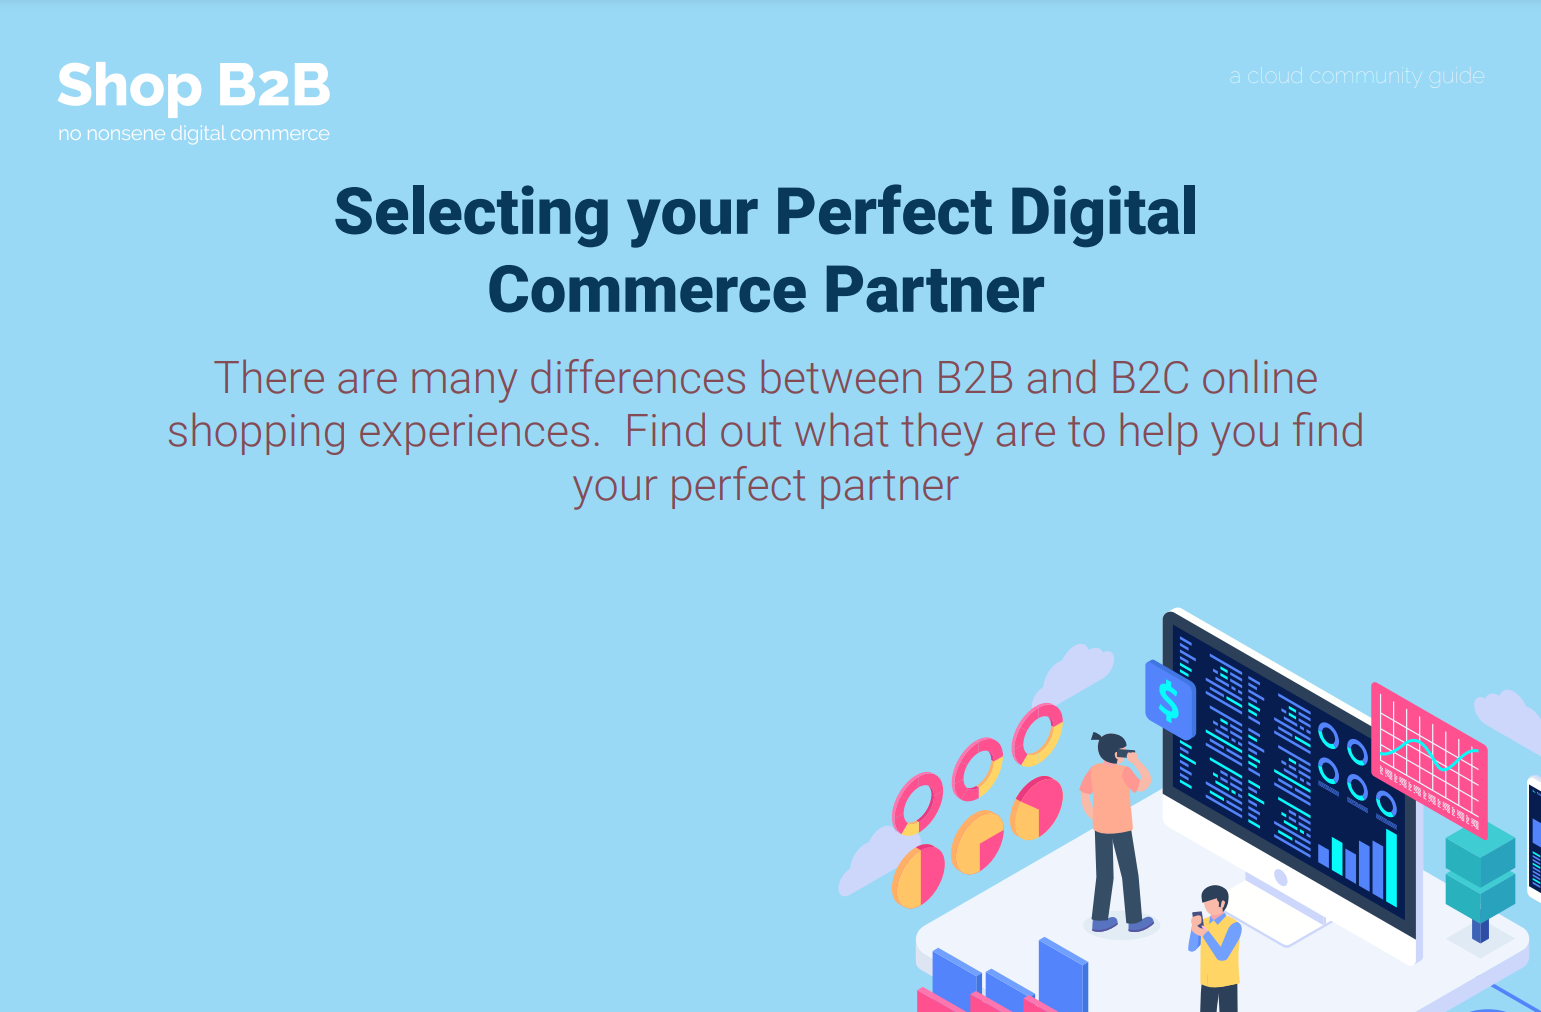 >Selecting your Perfect Digital Commerce Partner